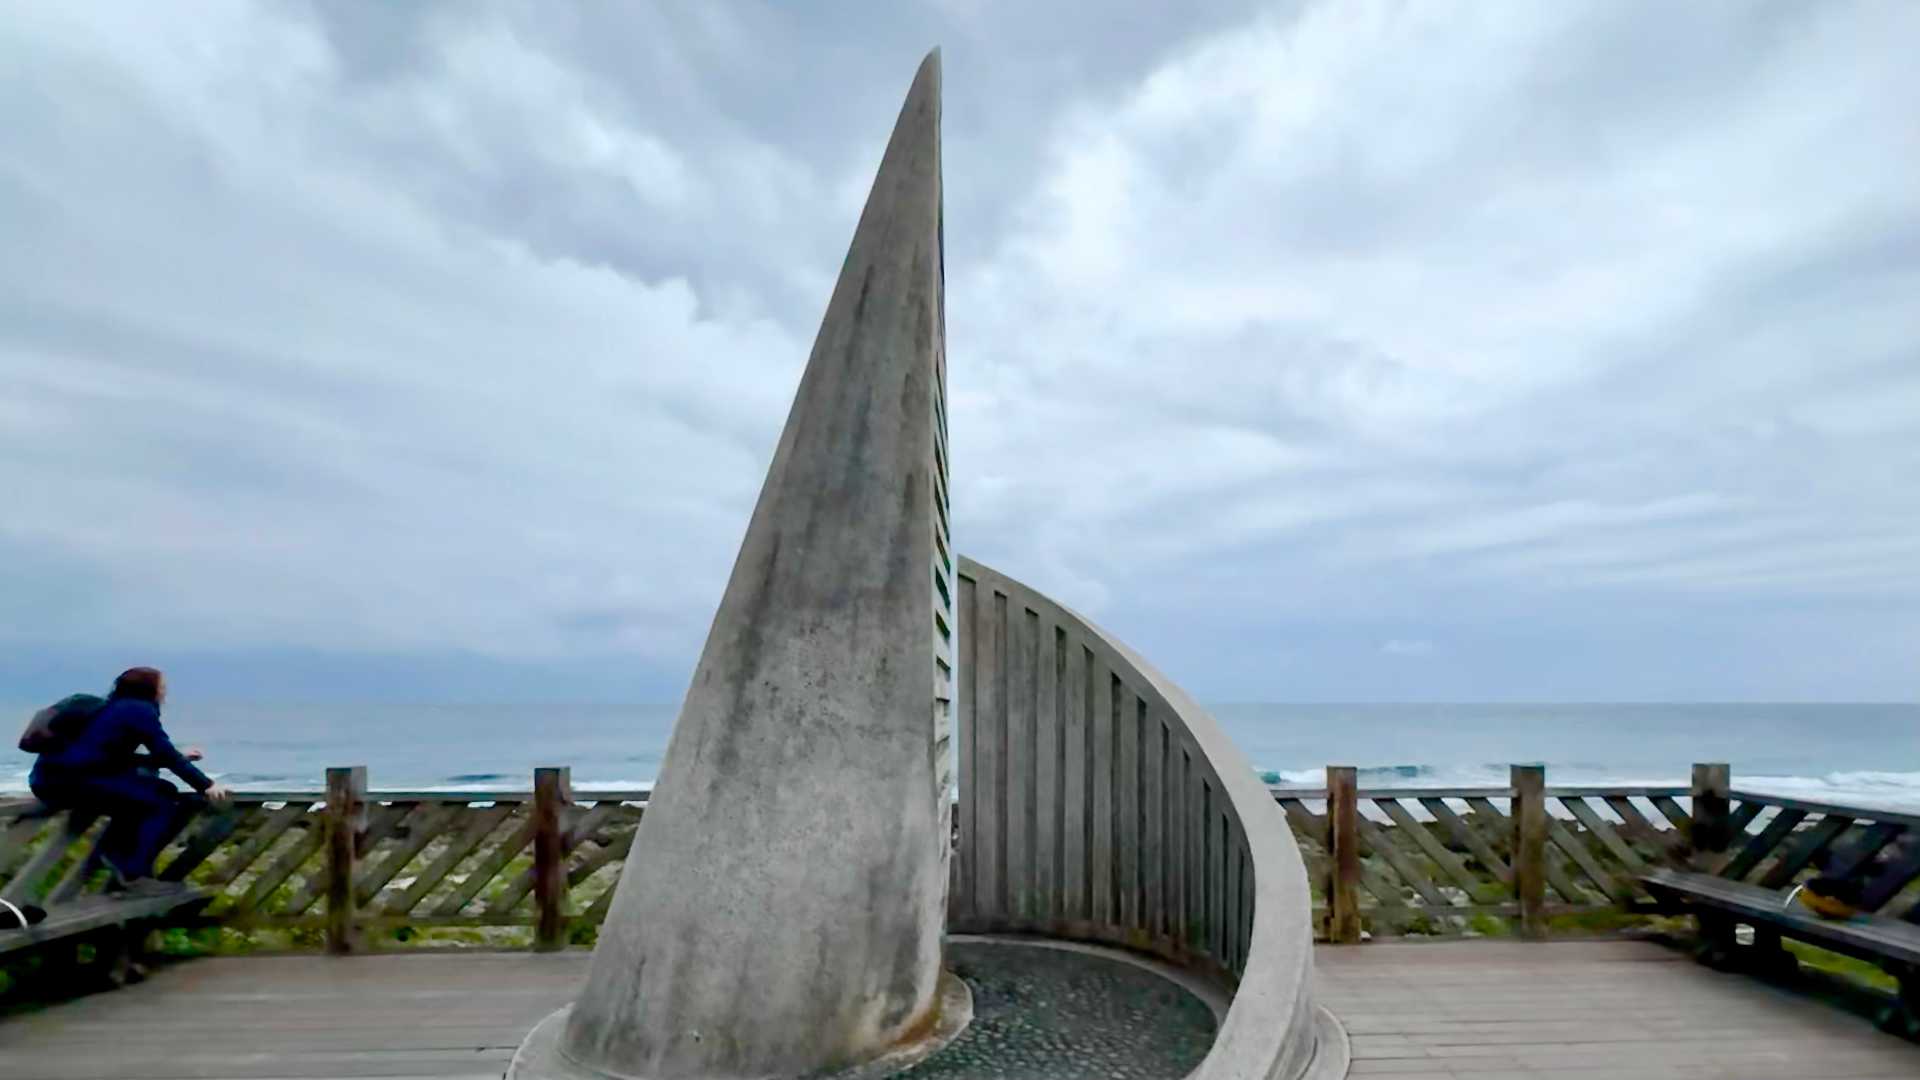 A spiral concrete sculpture on a wooden viewing platform. One person is sitting on the handrailing. The ocean is in the distance.